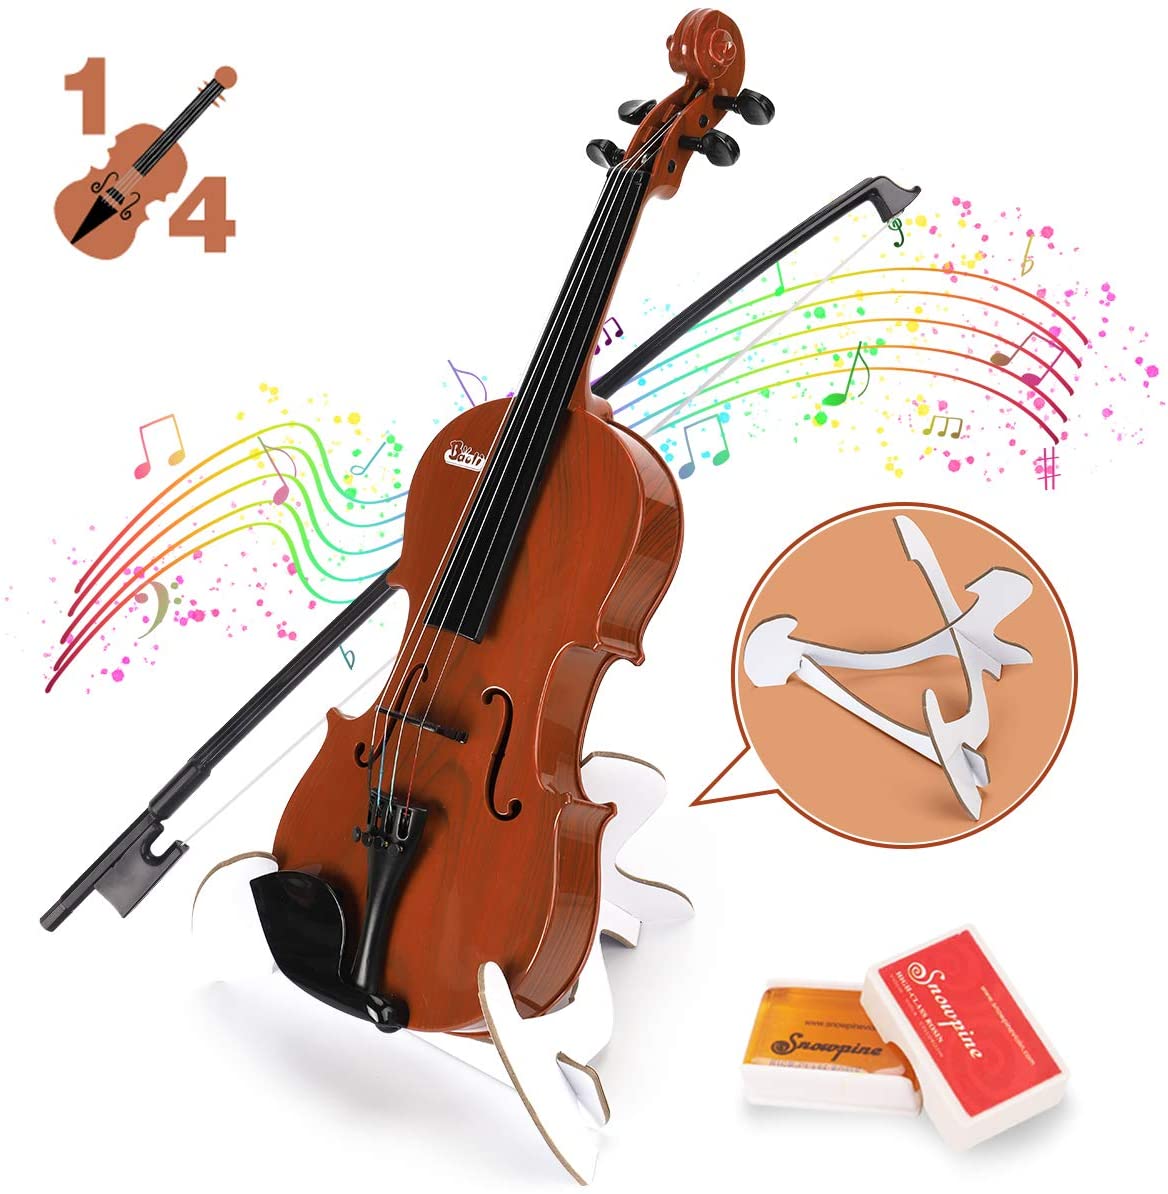 BAOLI Kids Music  Violin Toy with Tuner, Free Rosin, Chin Rest, Strings, Early Educational Musical Instruments for Beginner Above 36 Months , Birthday Gifts for Boys&amp;Girls(1/4 Brown) - Home Decor Gifts and More